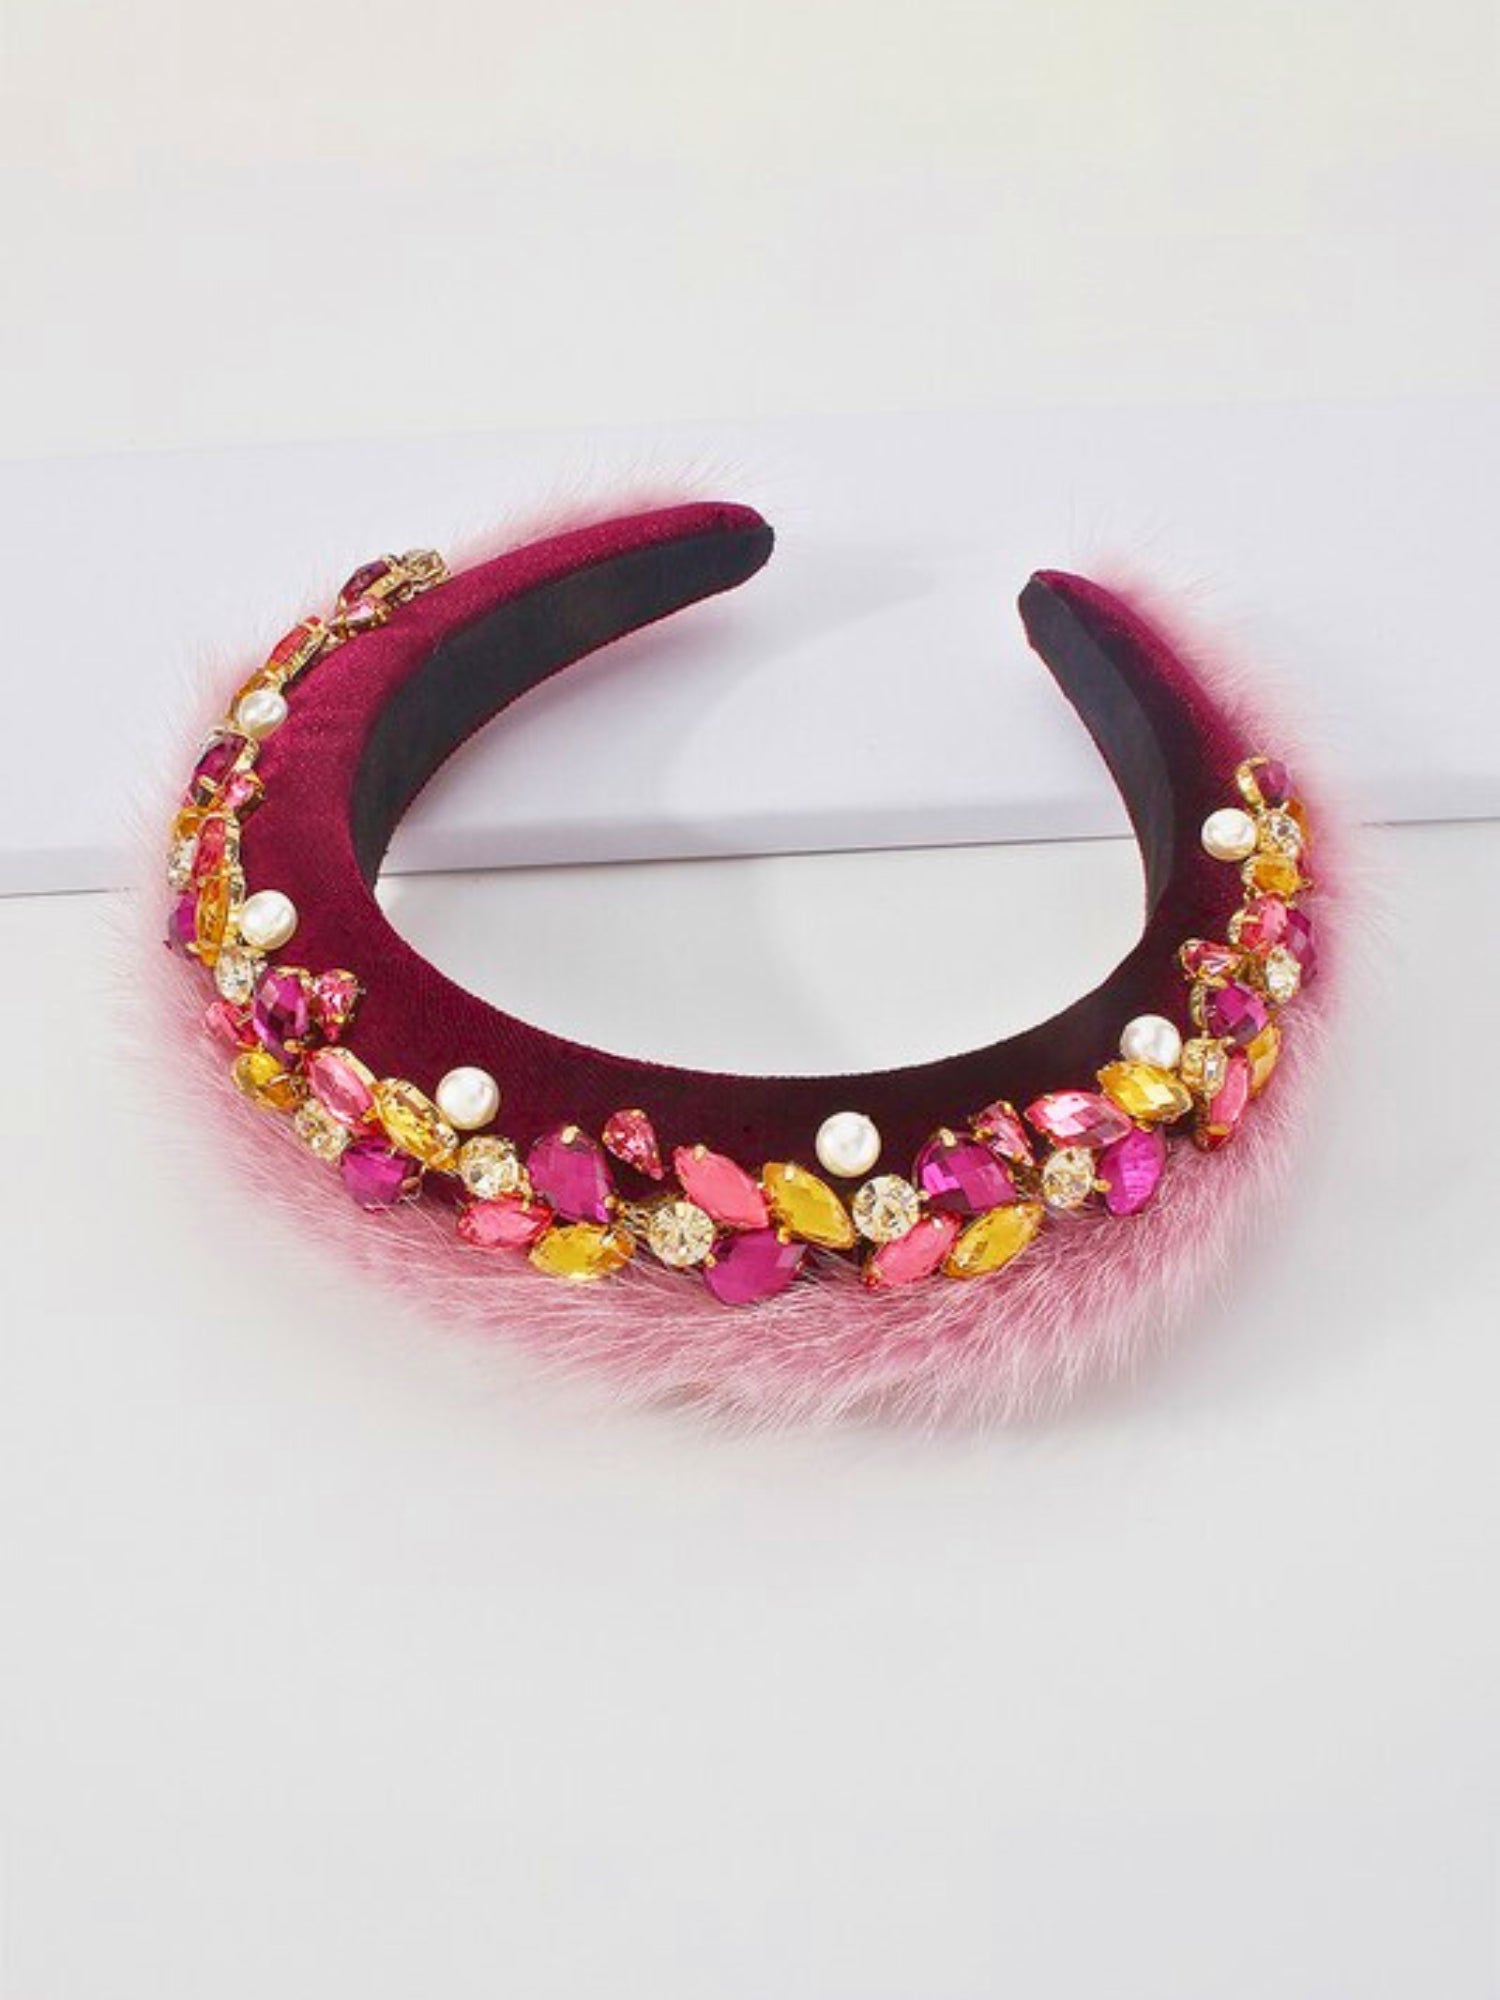 The Winter Magic Headband - The Winter Magic Headband is made of a purple velvet, this headband features a strand of soft fur and has two strands of gems in various gold and purple tones as well as faux pearls. This piece is meticulously handmade with suc